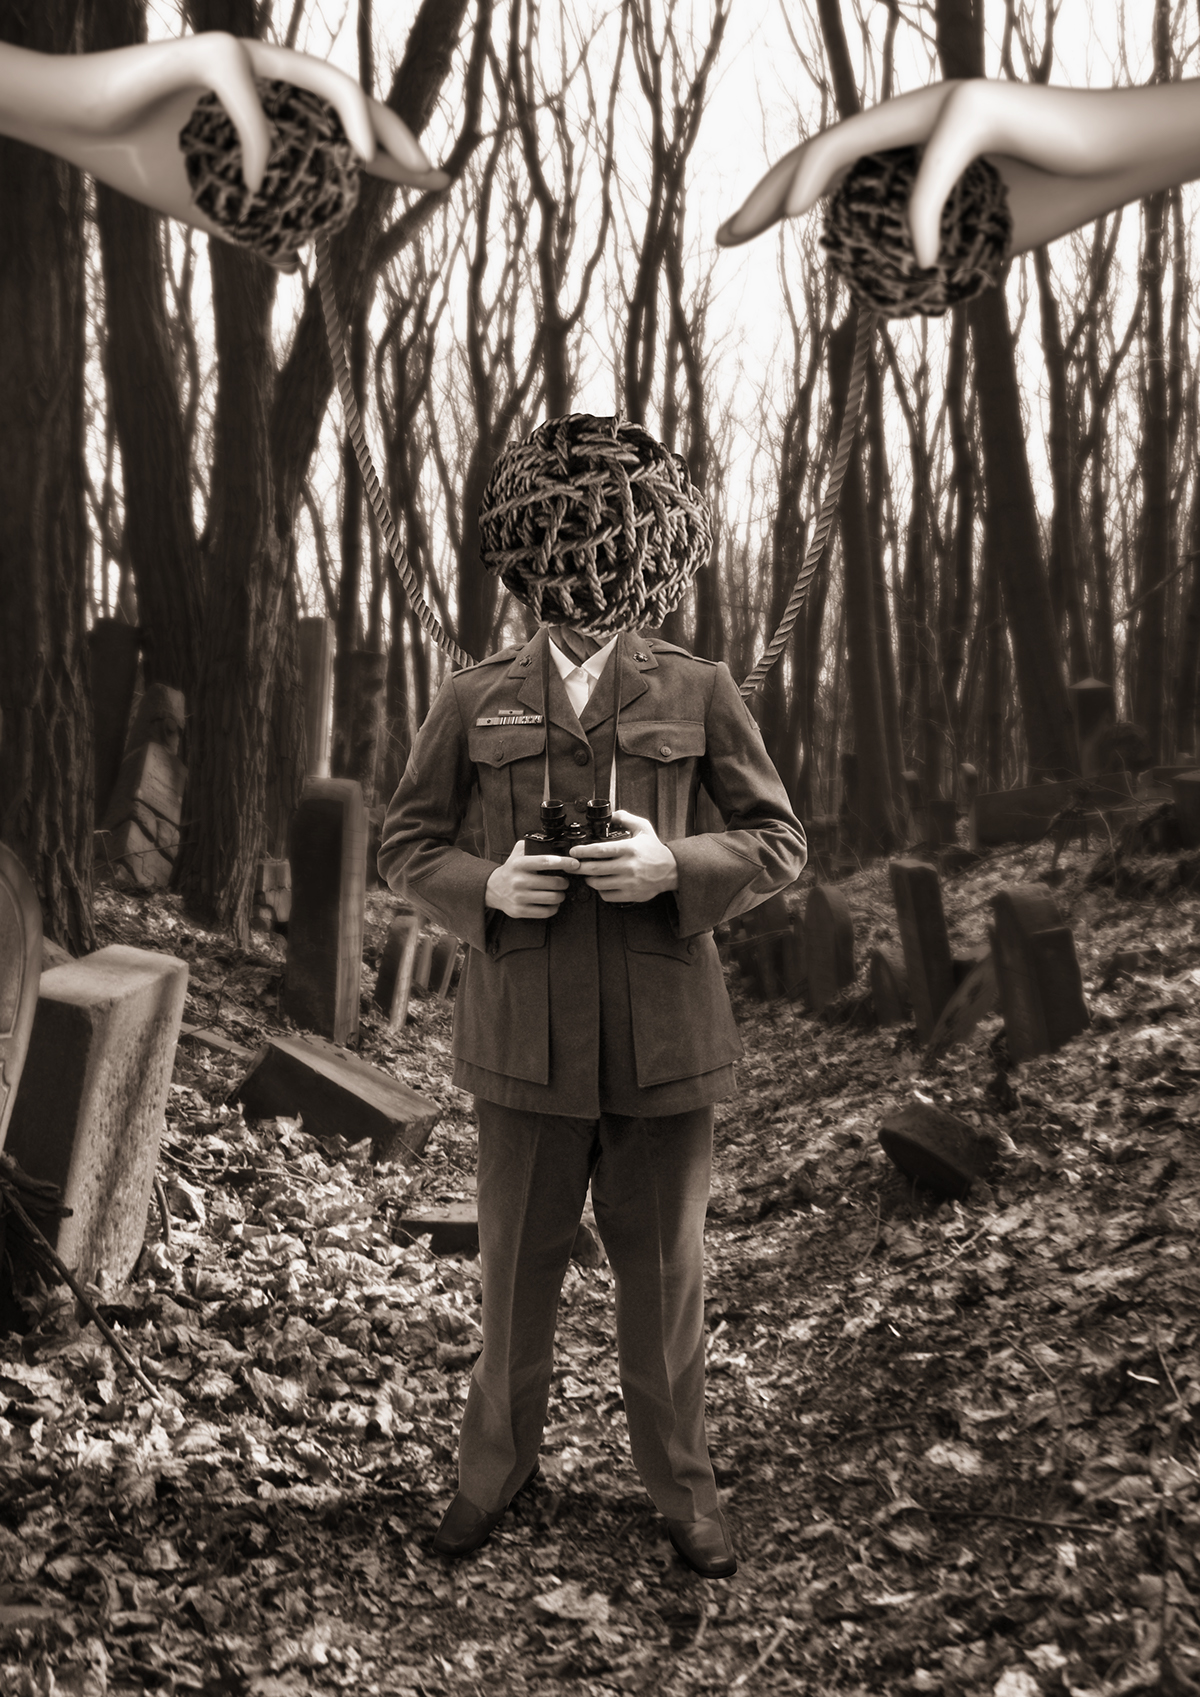 photomanipulation surreal soldier strings Master rope graveyeard hands forest autumn